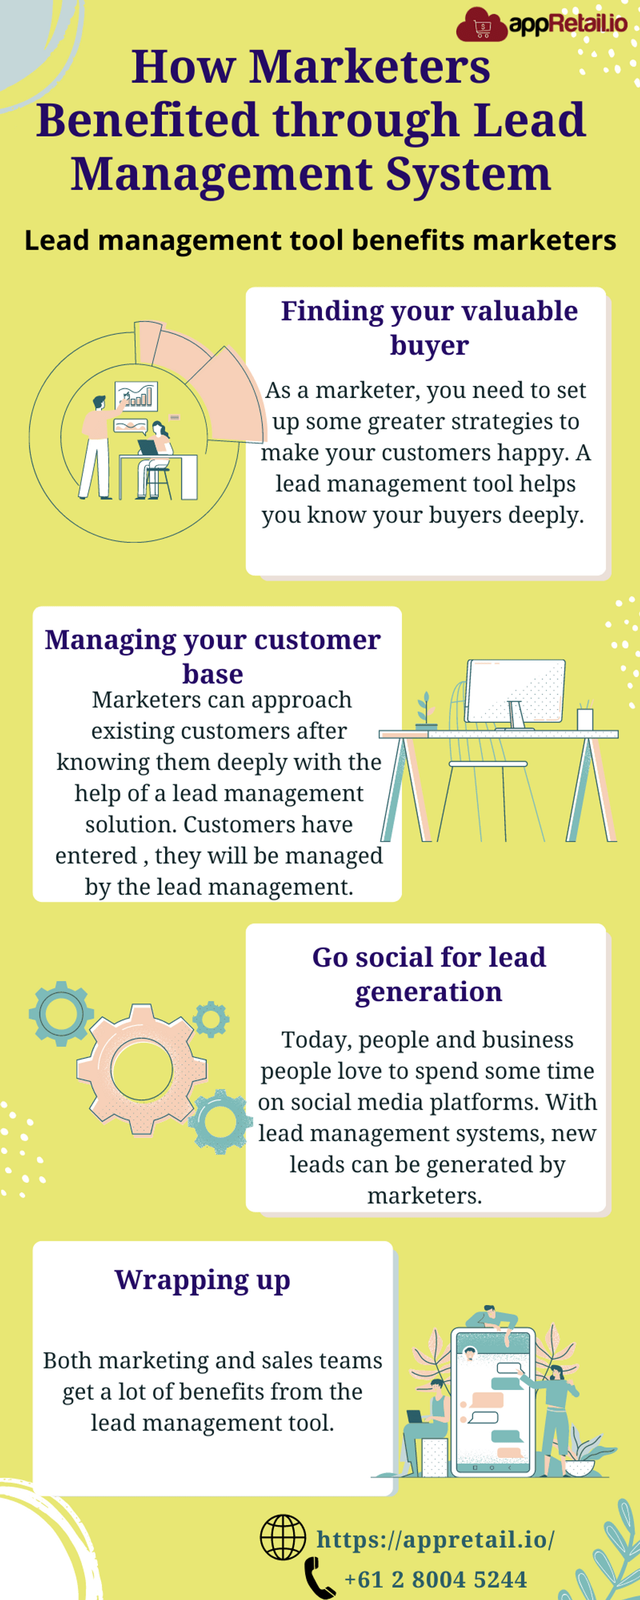 Benefits for marketers through Lead Management System